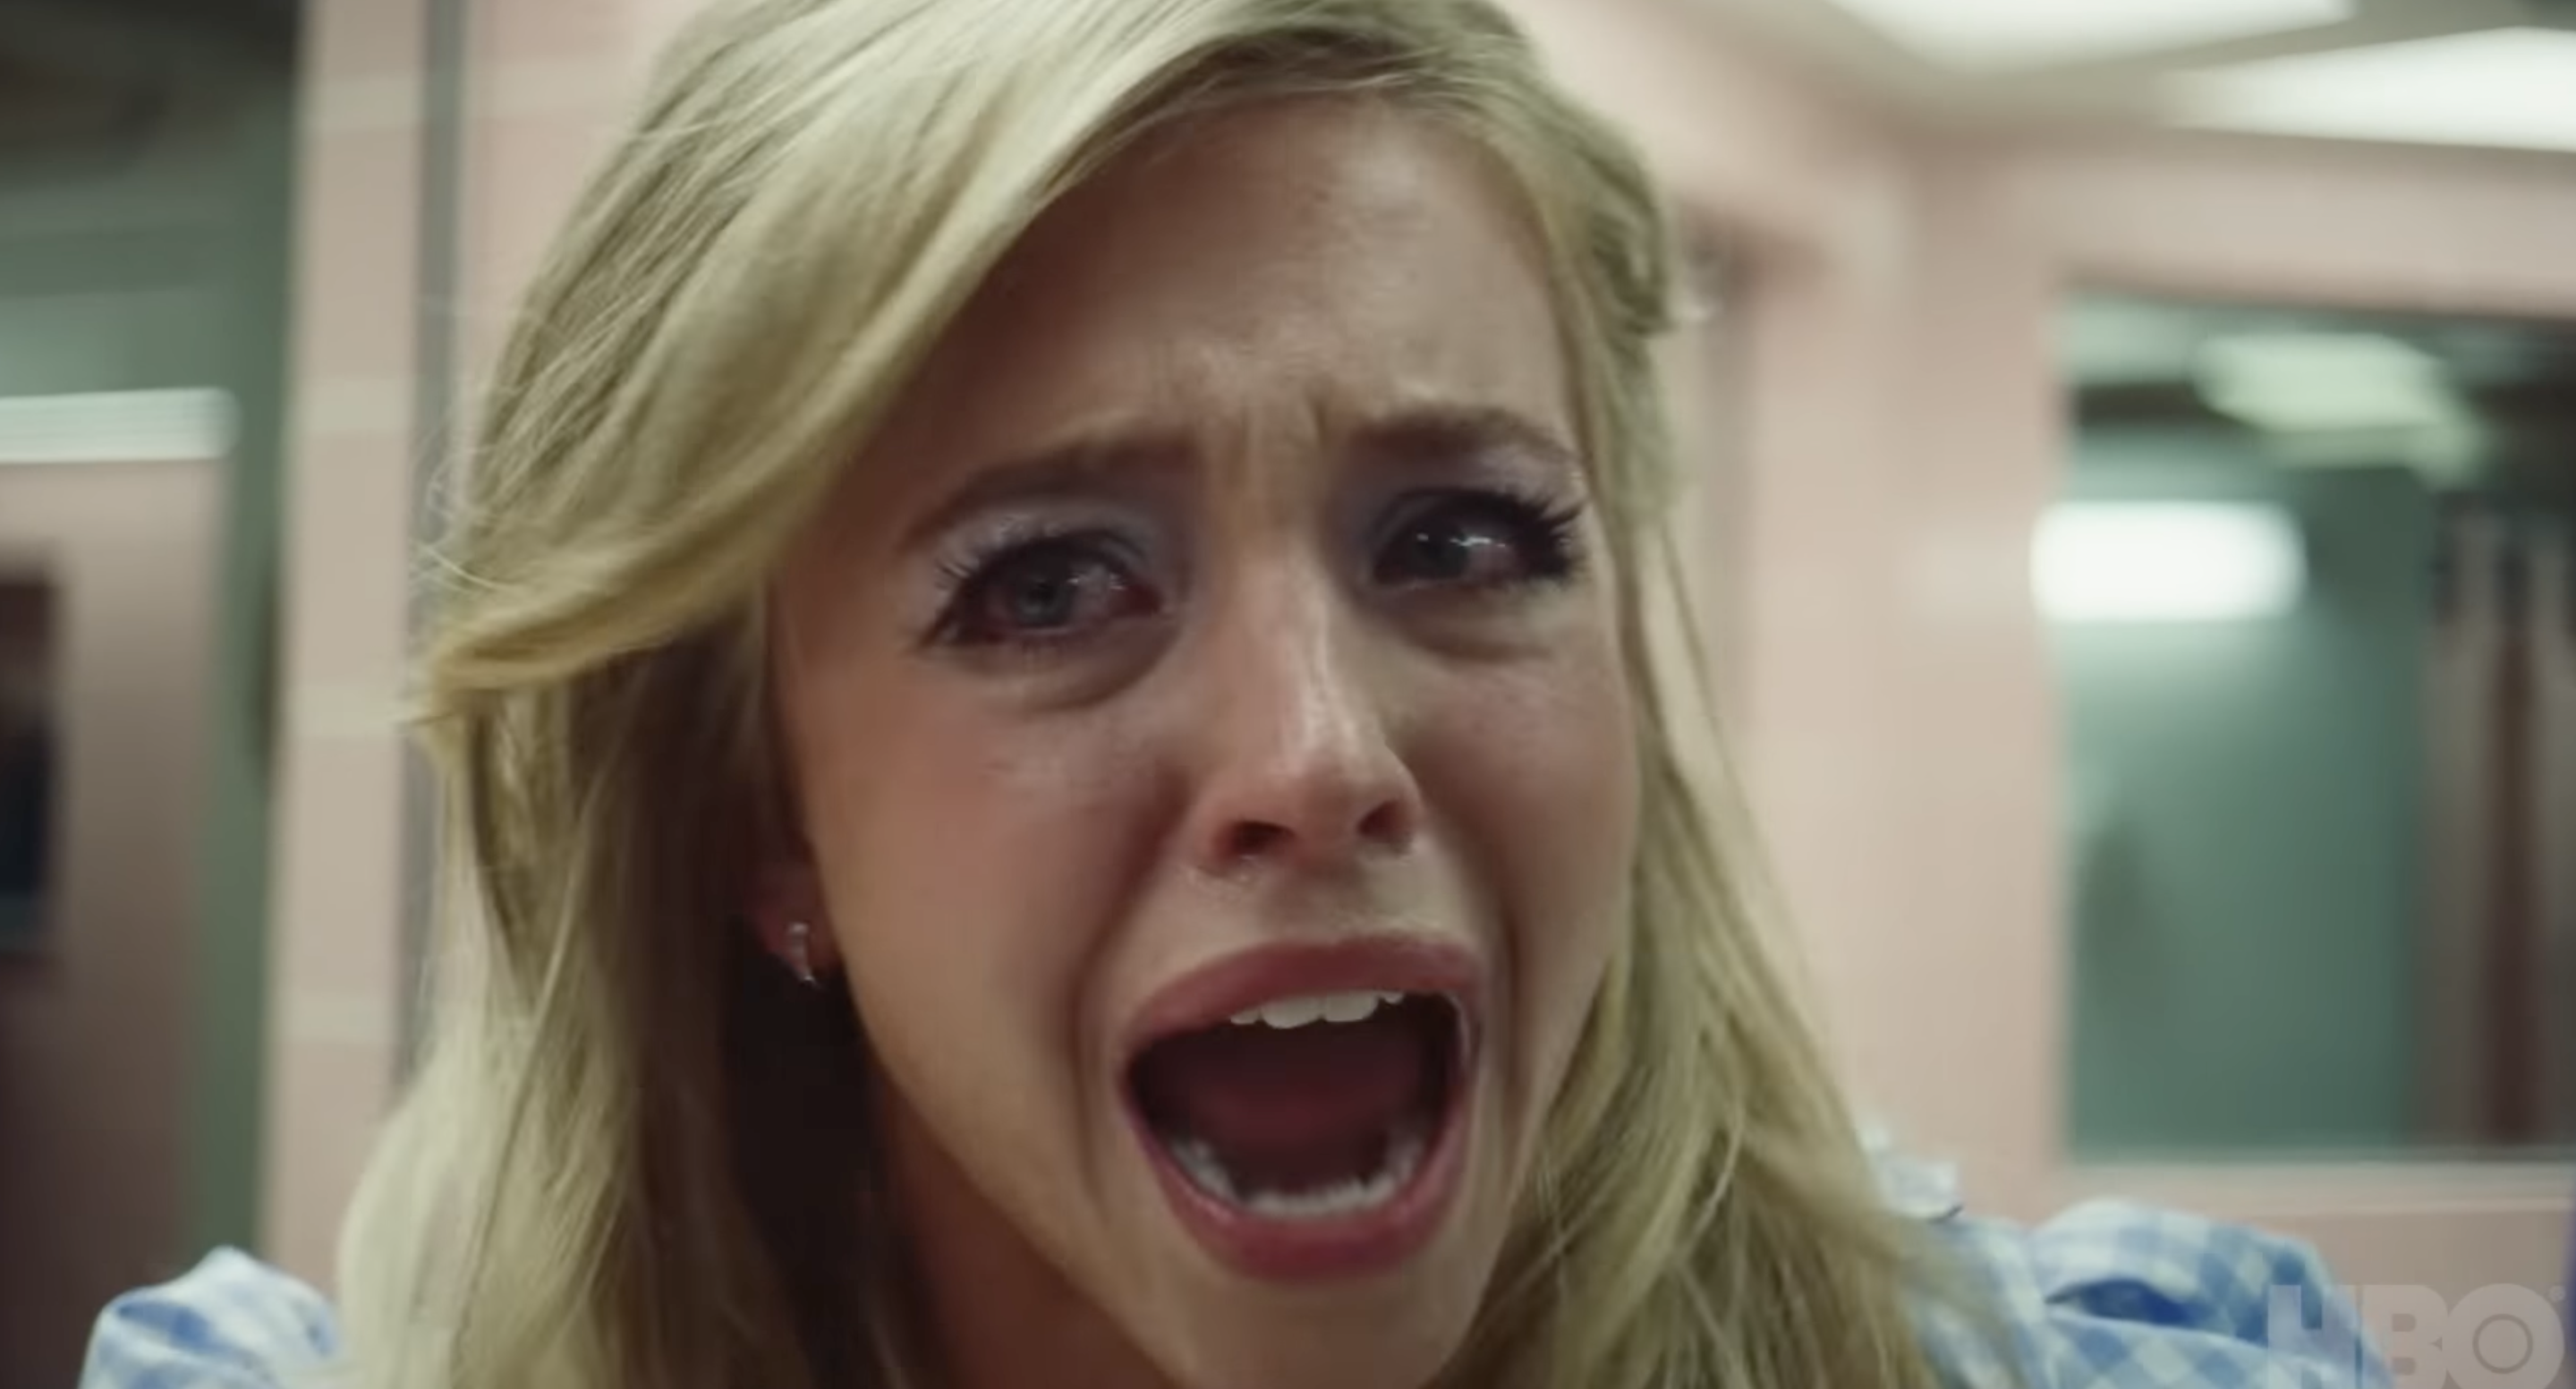 A distressed woman screams, close-up, from a TV show scene. She&#x27;s expressing intense emotion